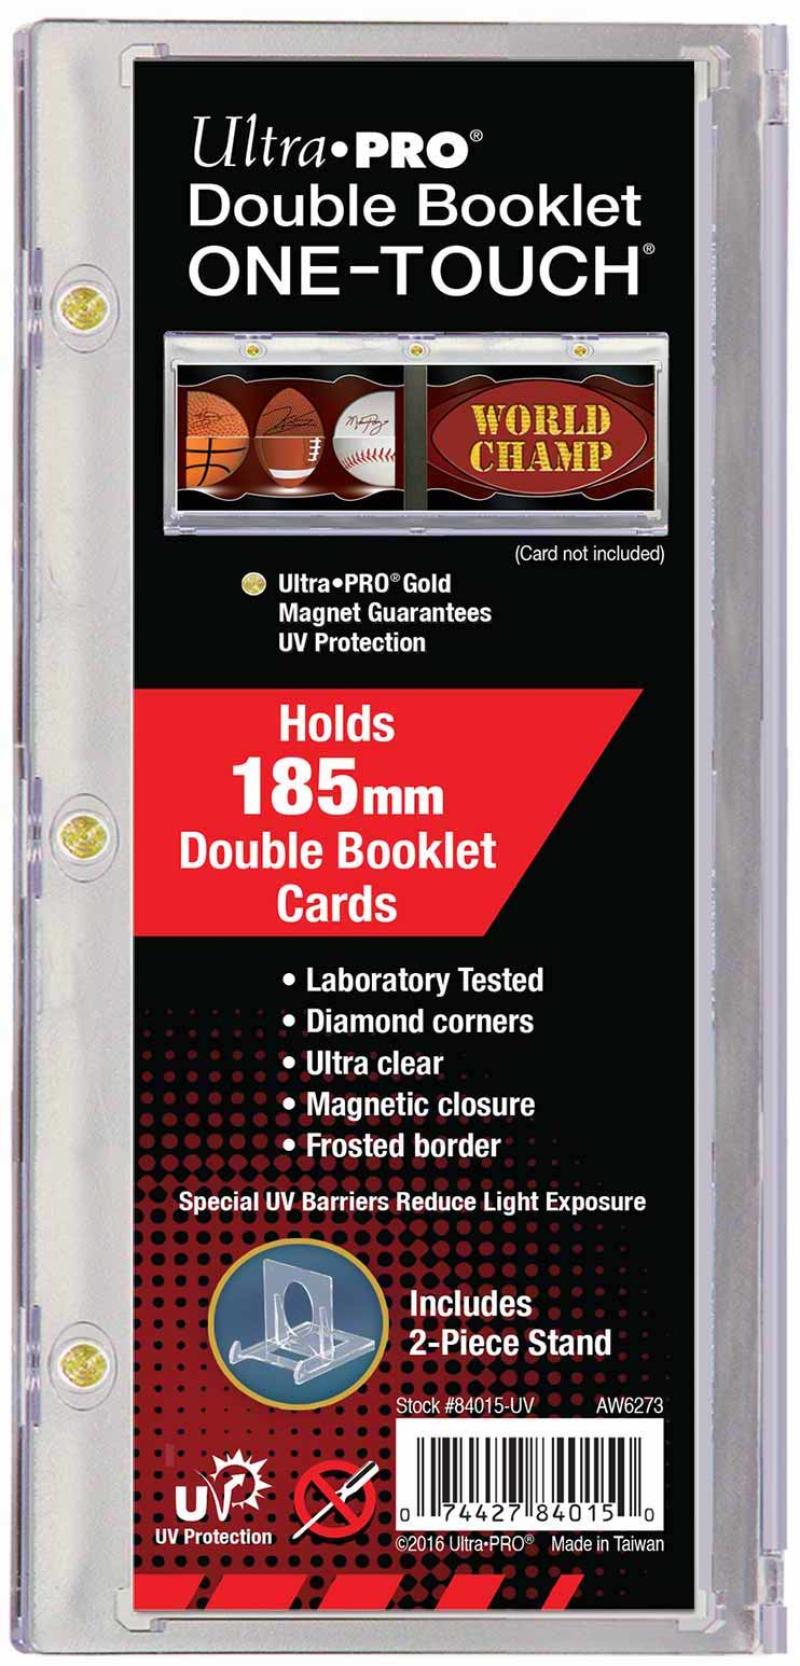 Ultra Pro 1Touch 185pt Double Booklet Magnetic Holder with Stand